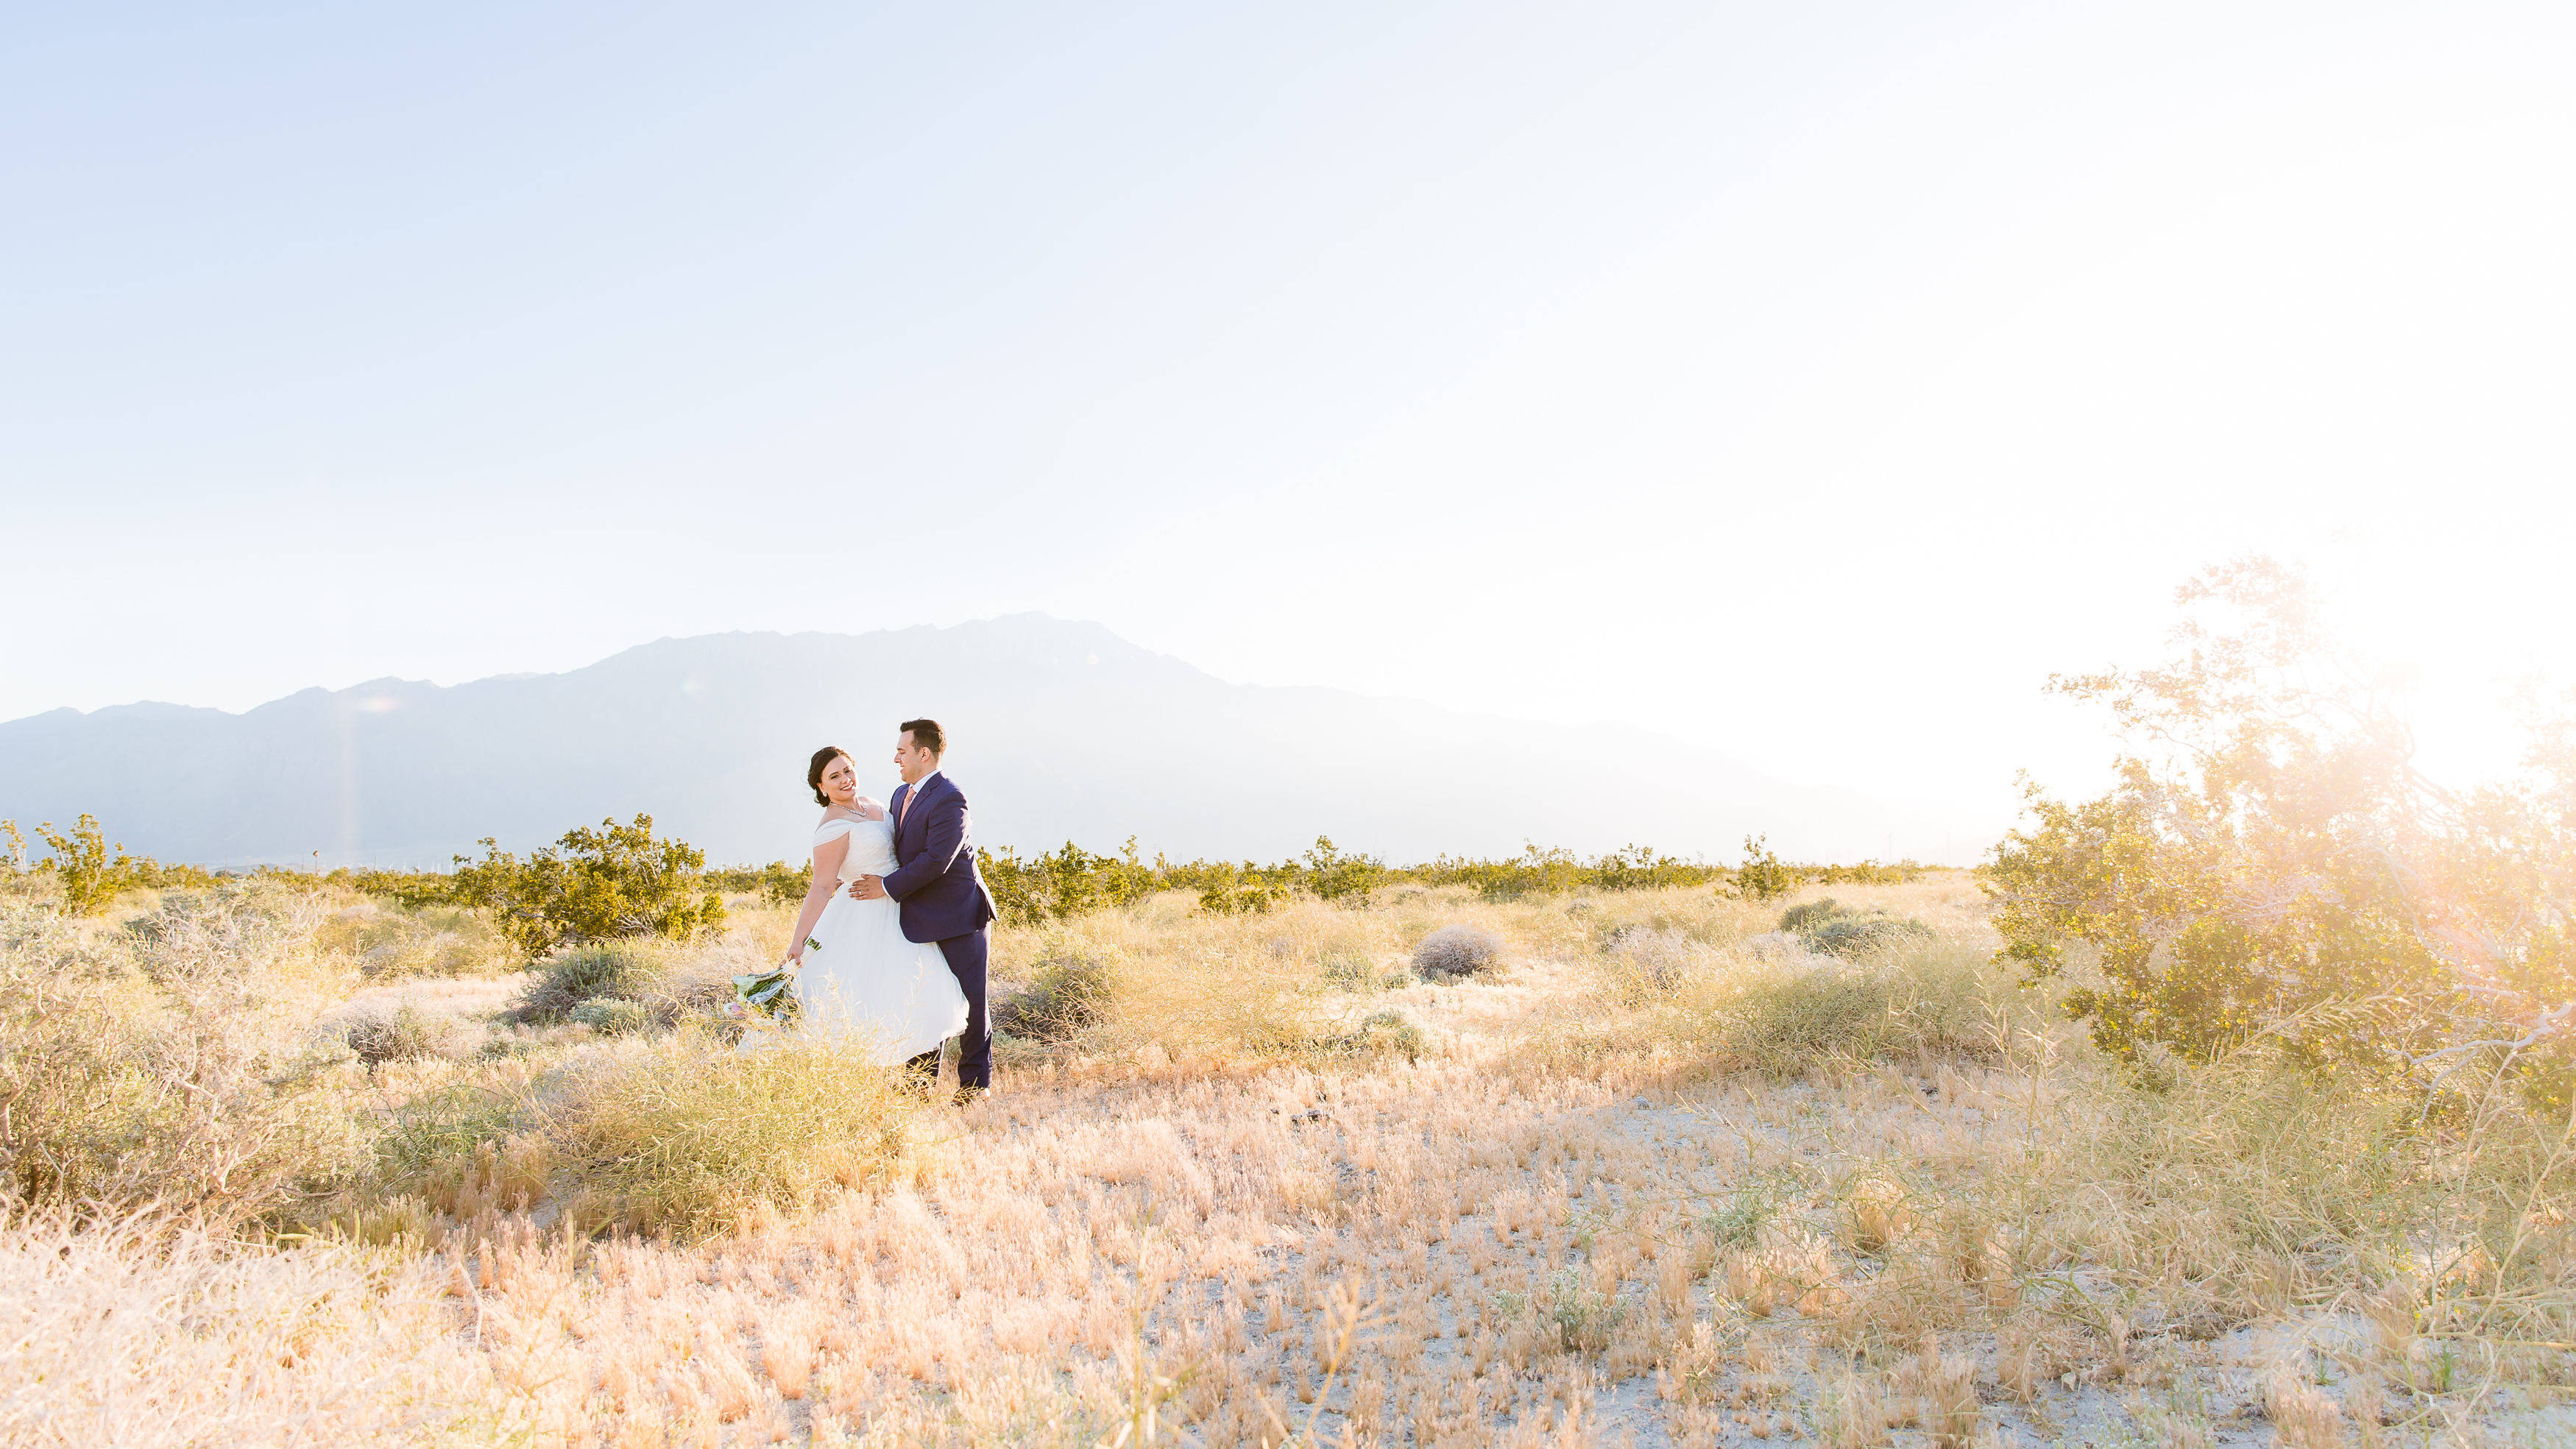 Couple dipping in the desert with mountains in background at golden hour